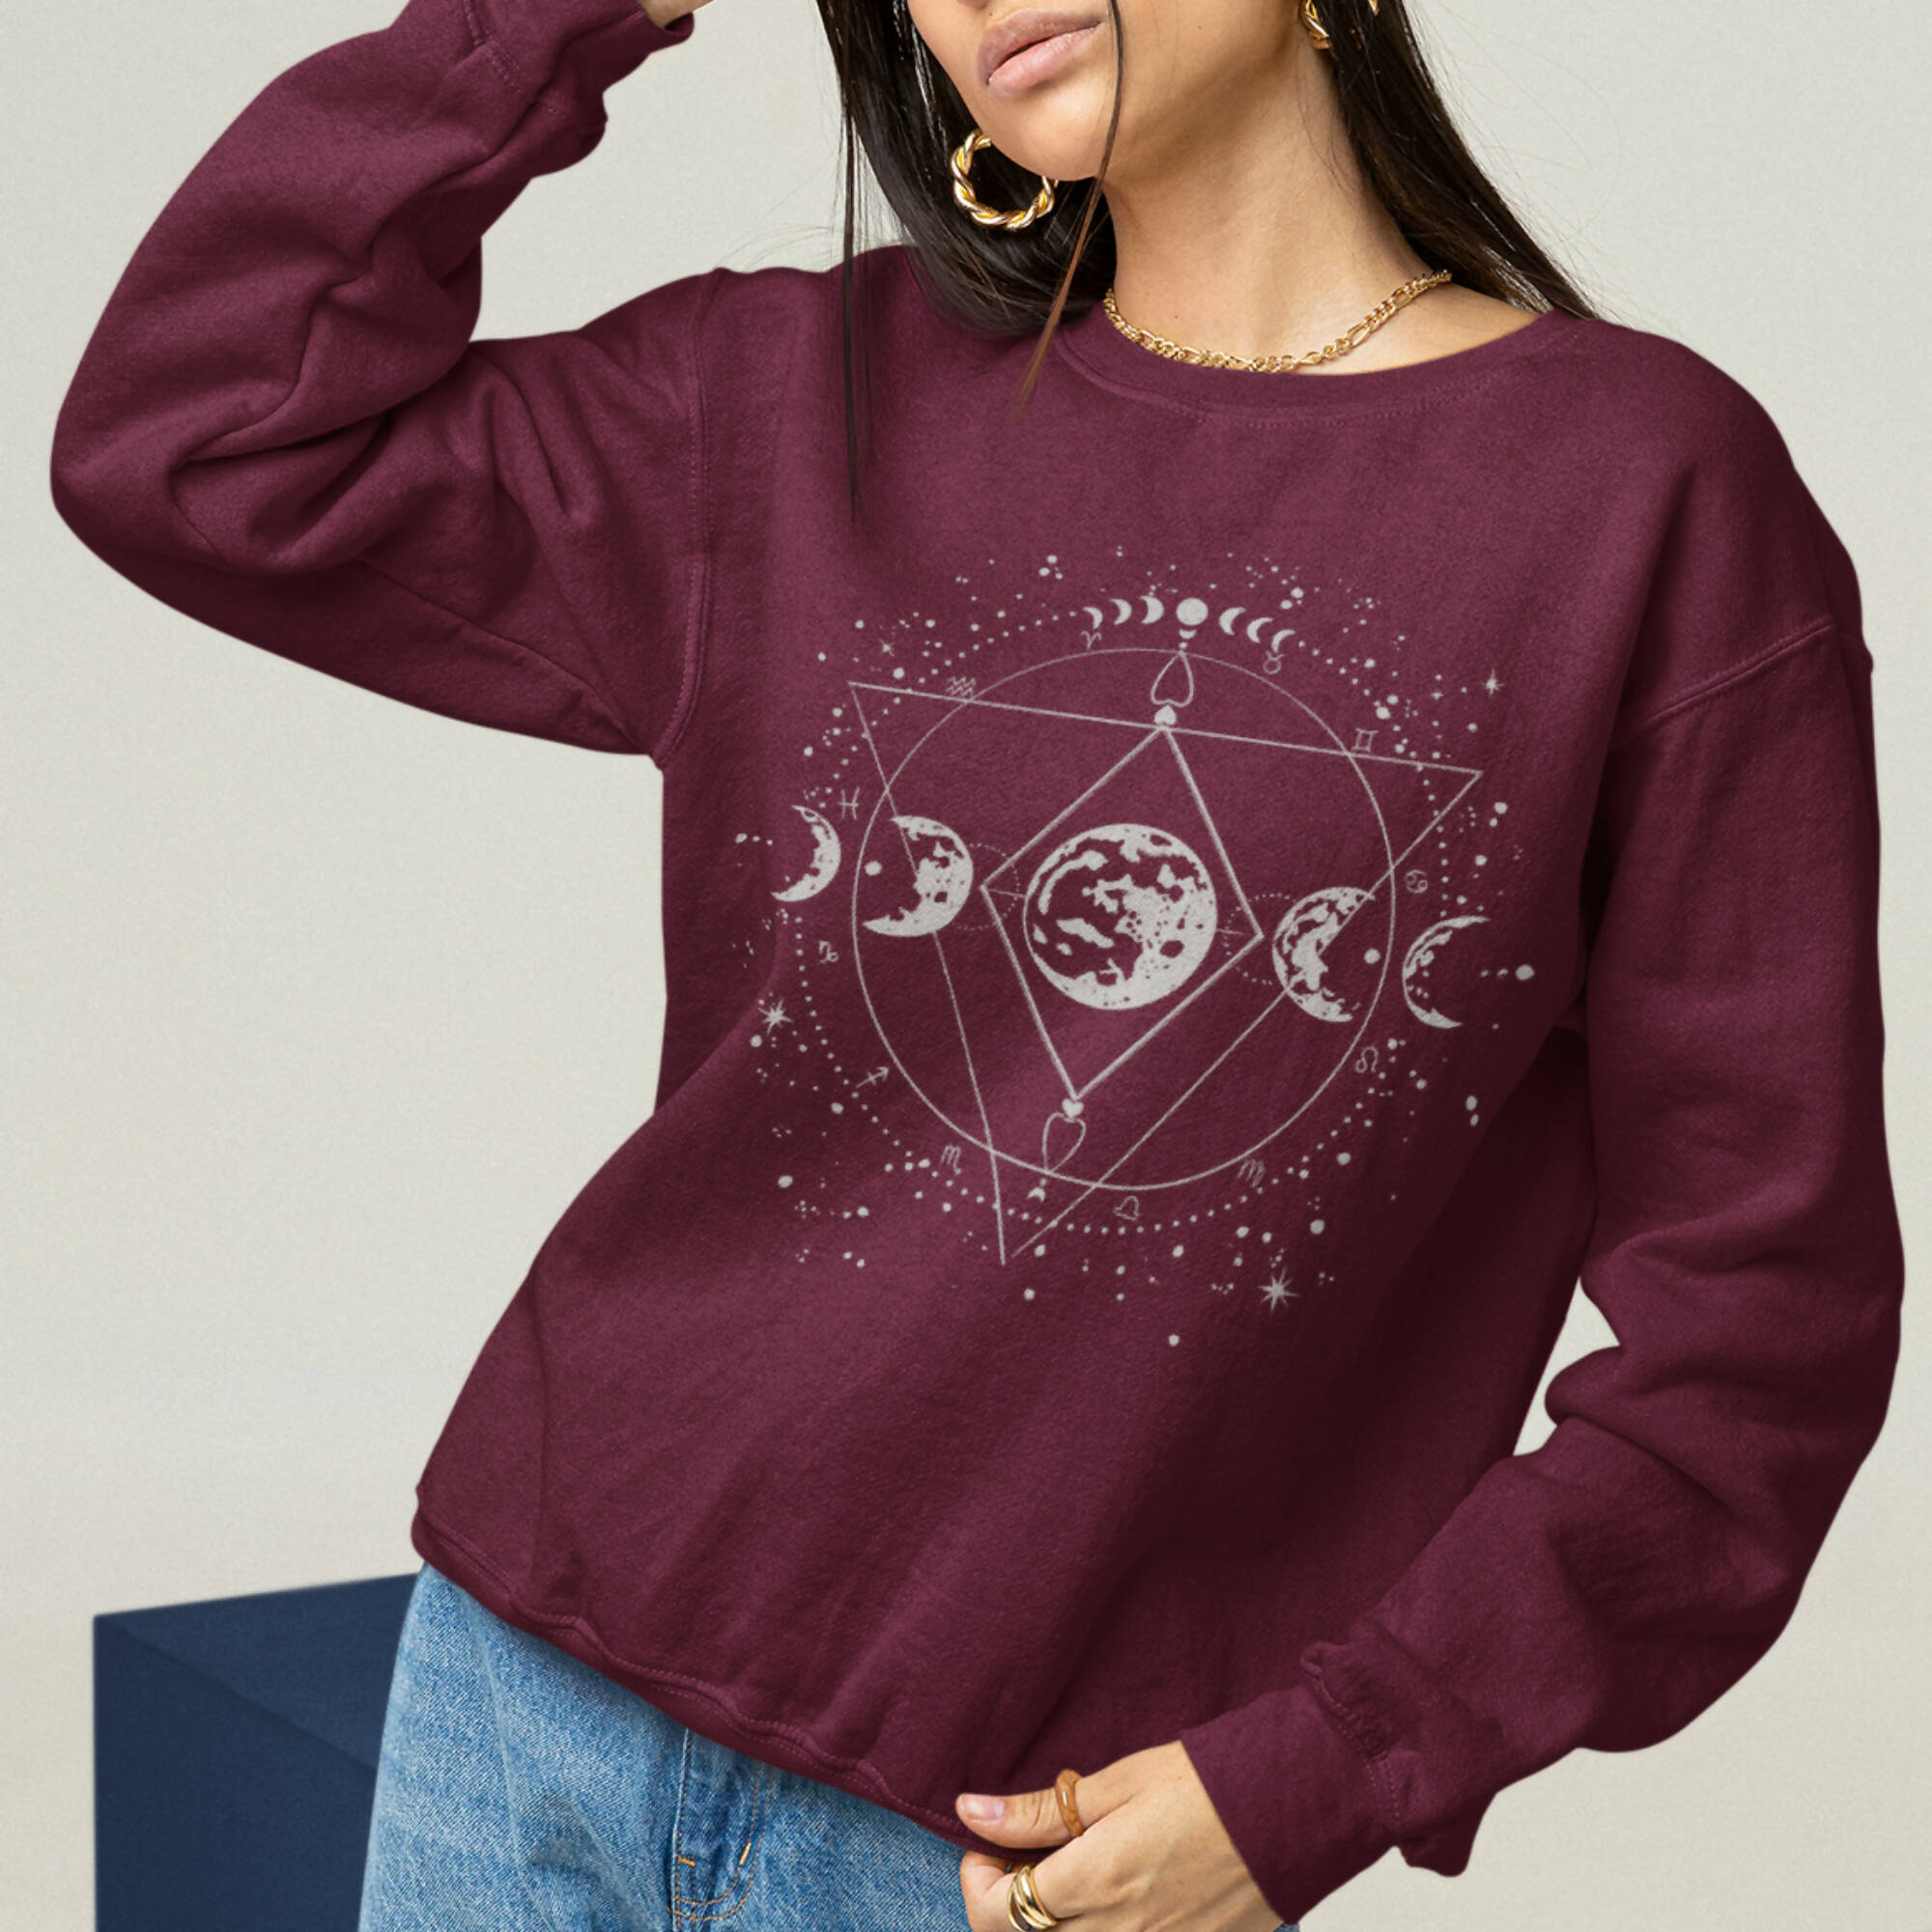 Hand-Drawn Geometric Moon Sweatshirt (Made-to-order. Free delivery, arrives within 2 weeks)